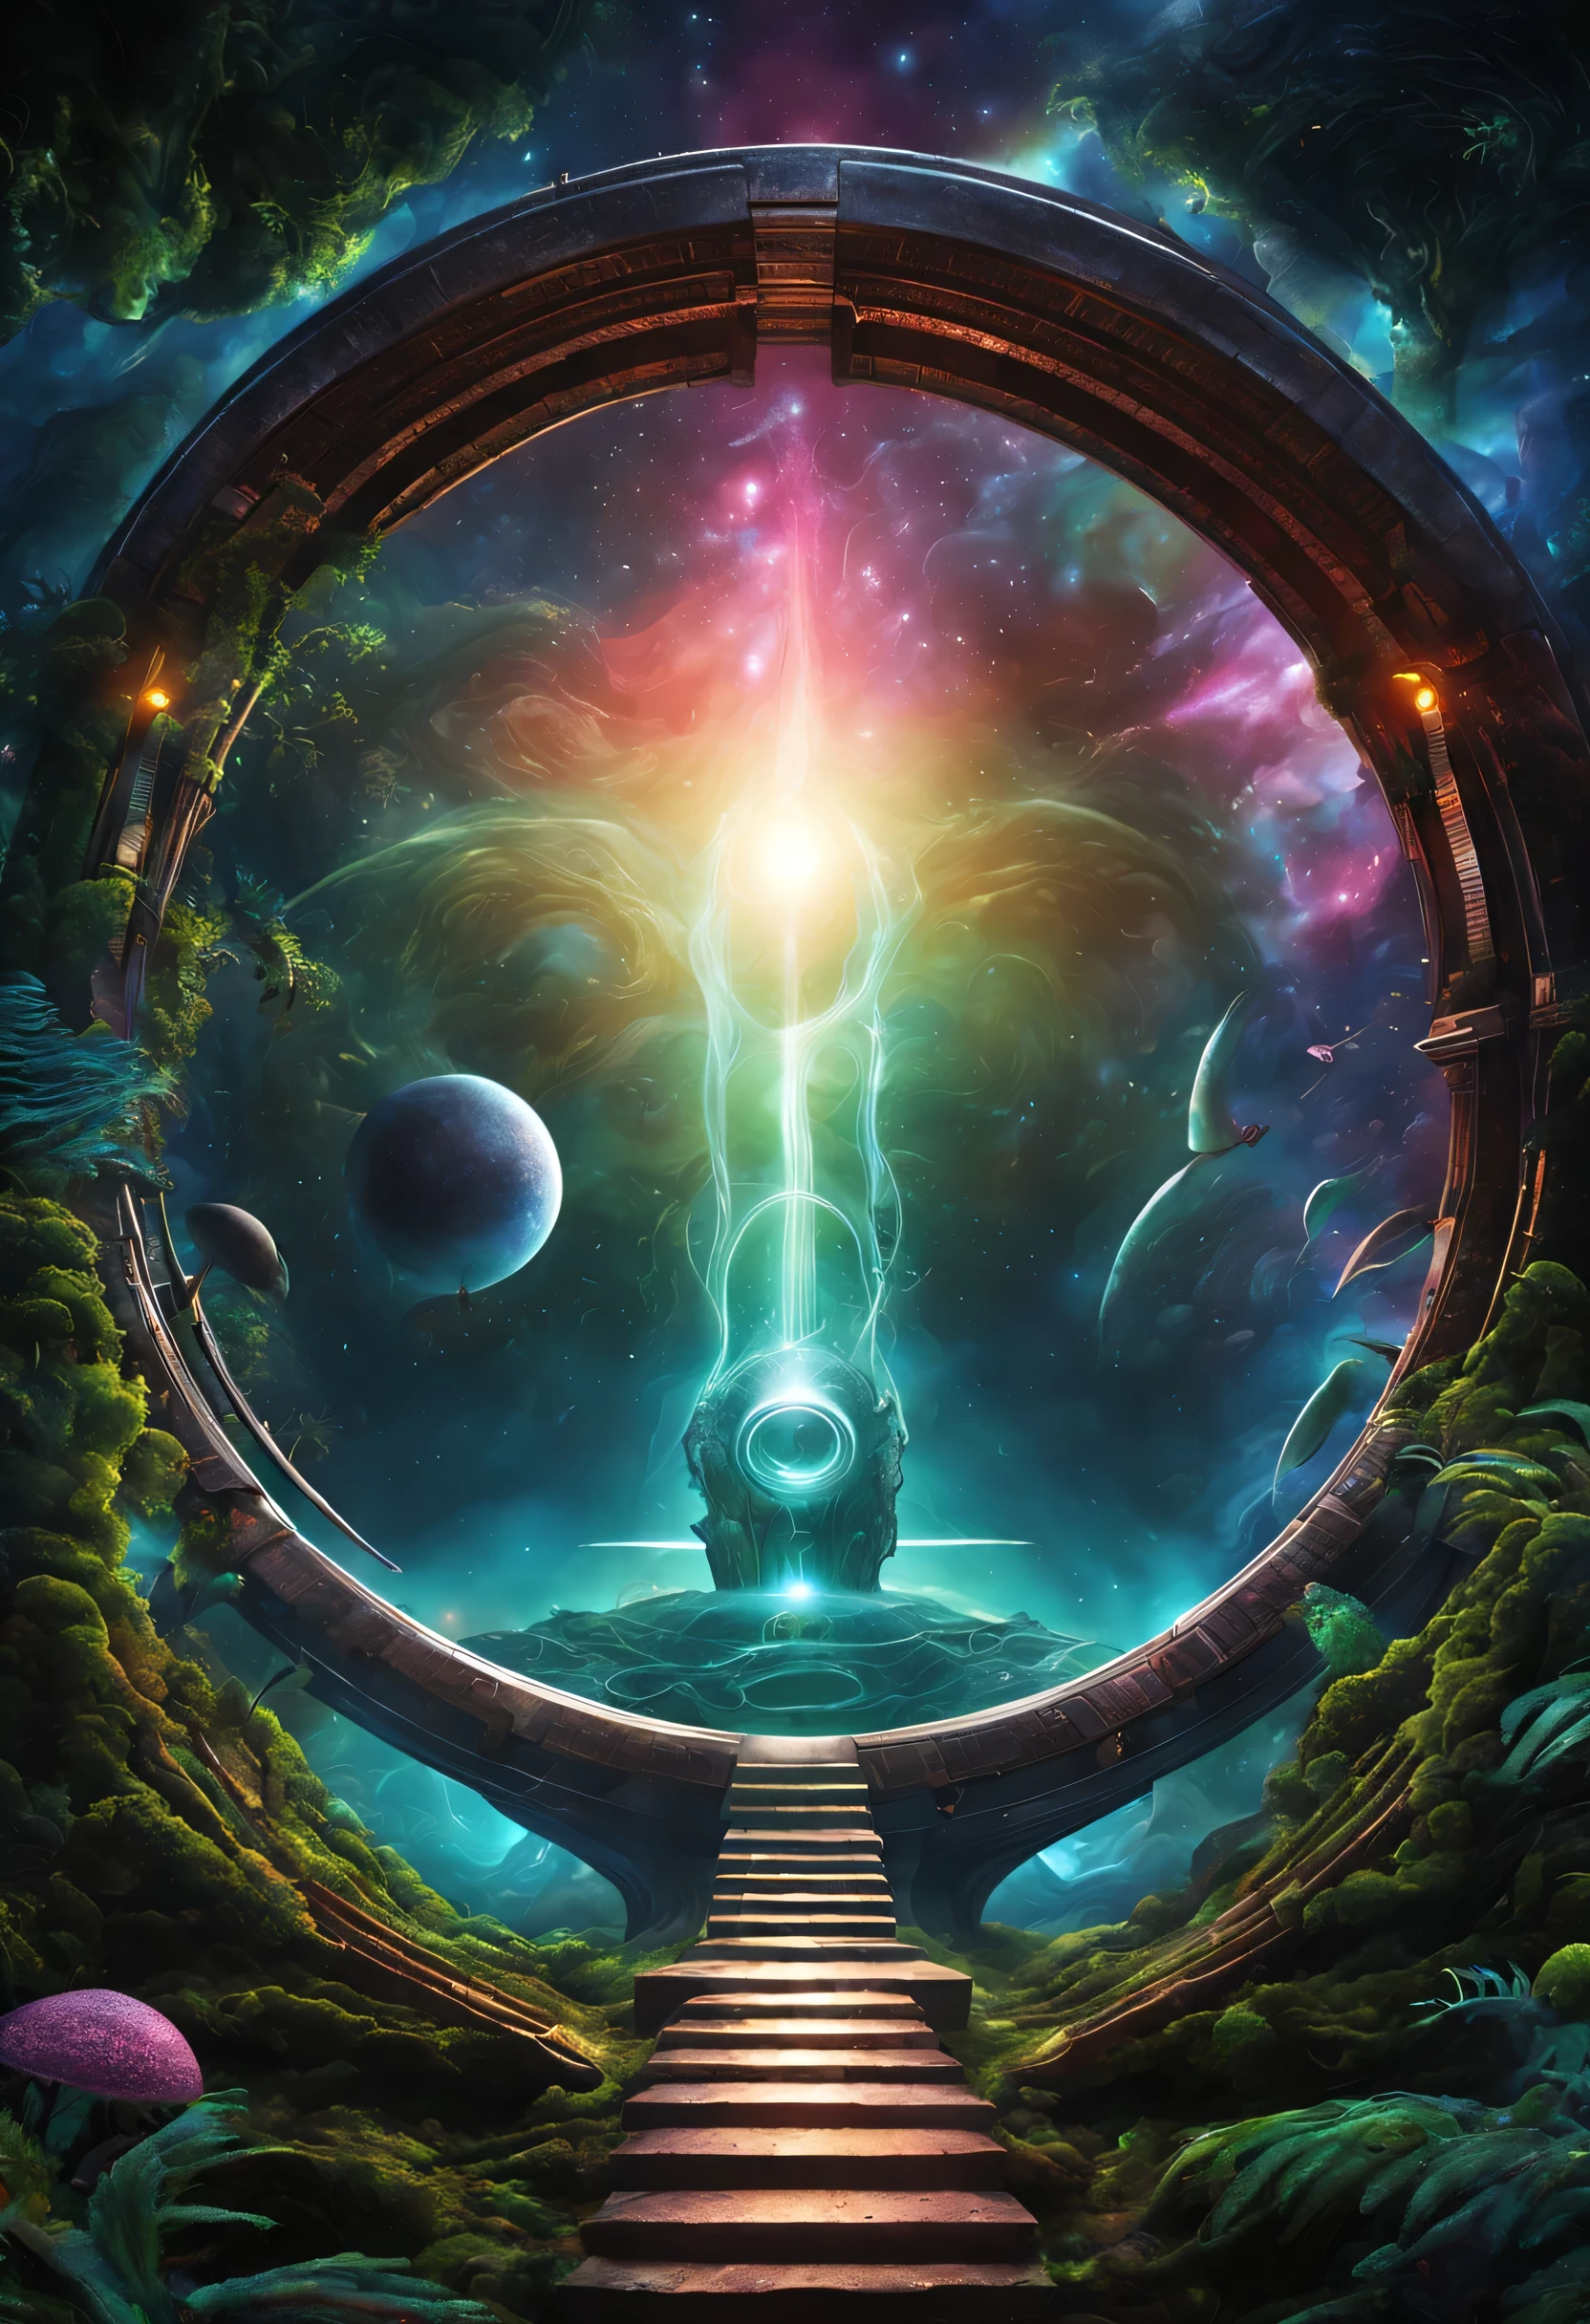  The Gate of Time and Space，Web portals，wormhole，swirl，connected, Alien worlds and alien jungles，alien creatures，